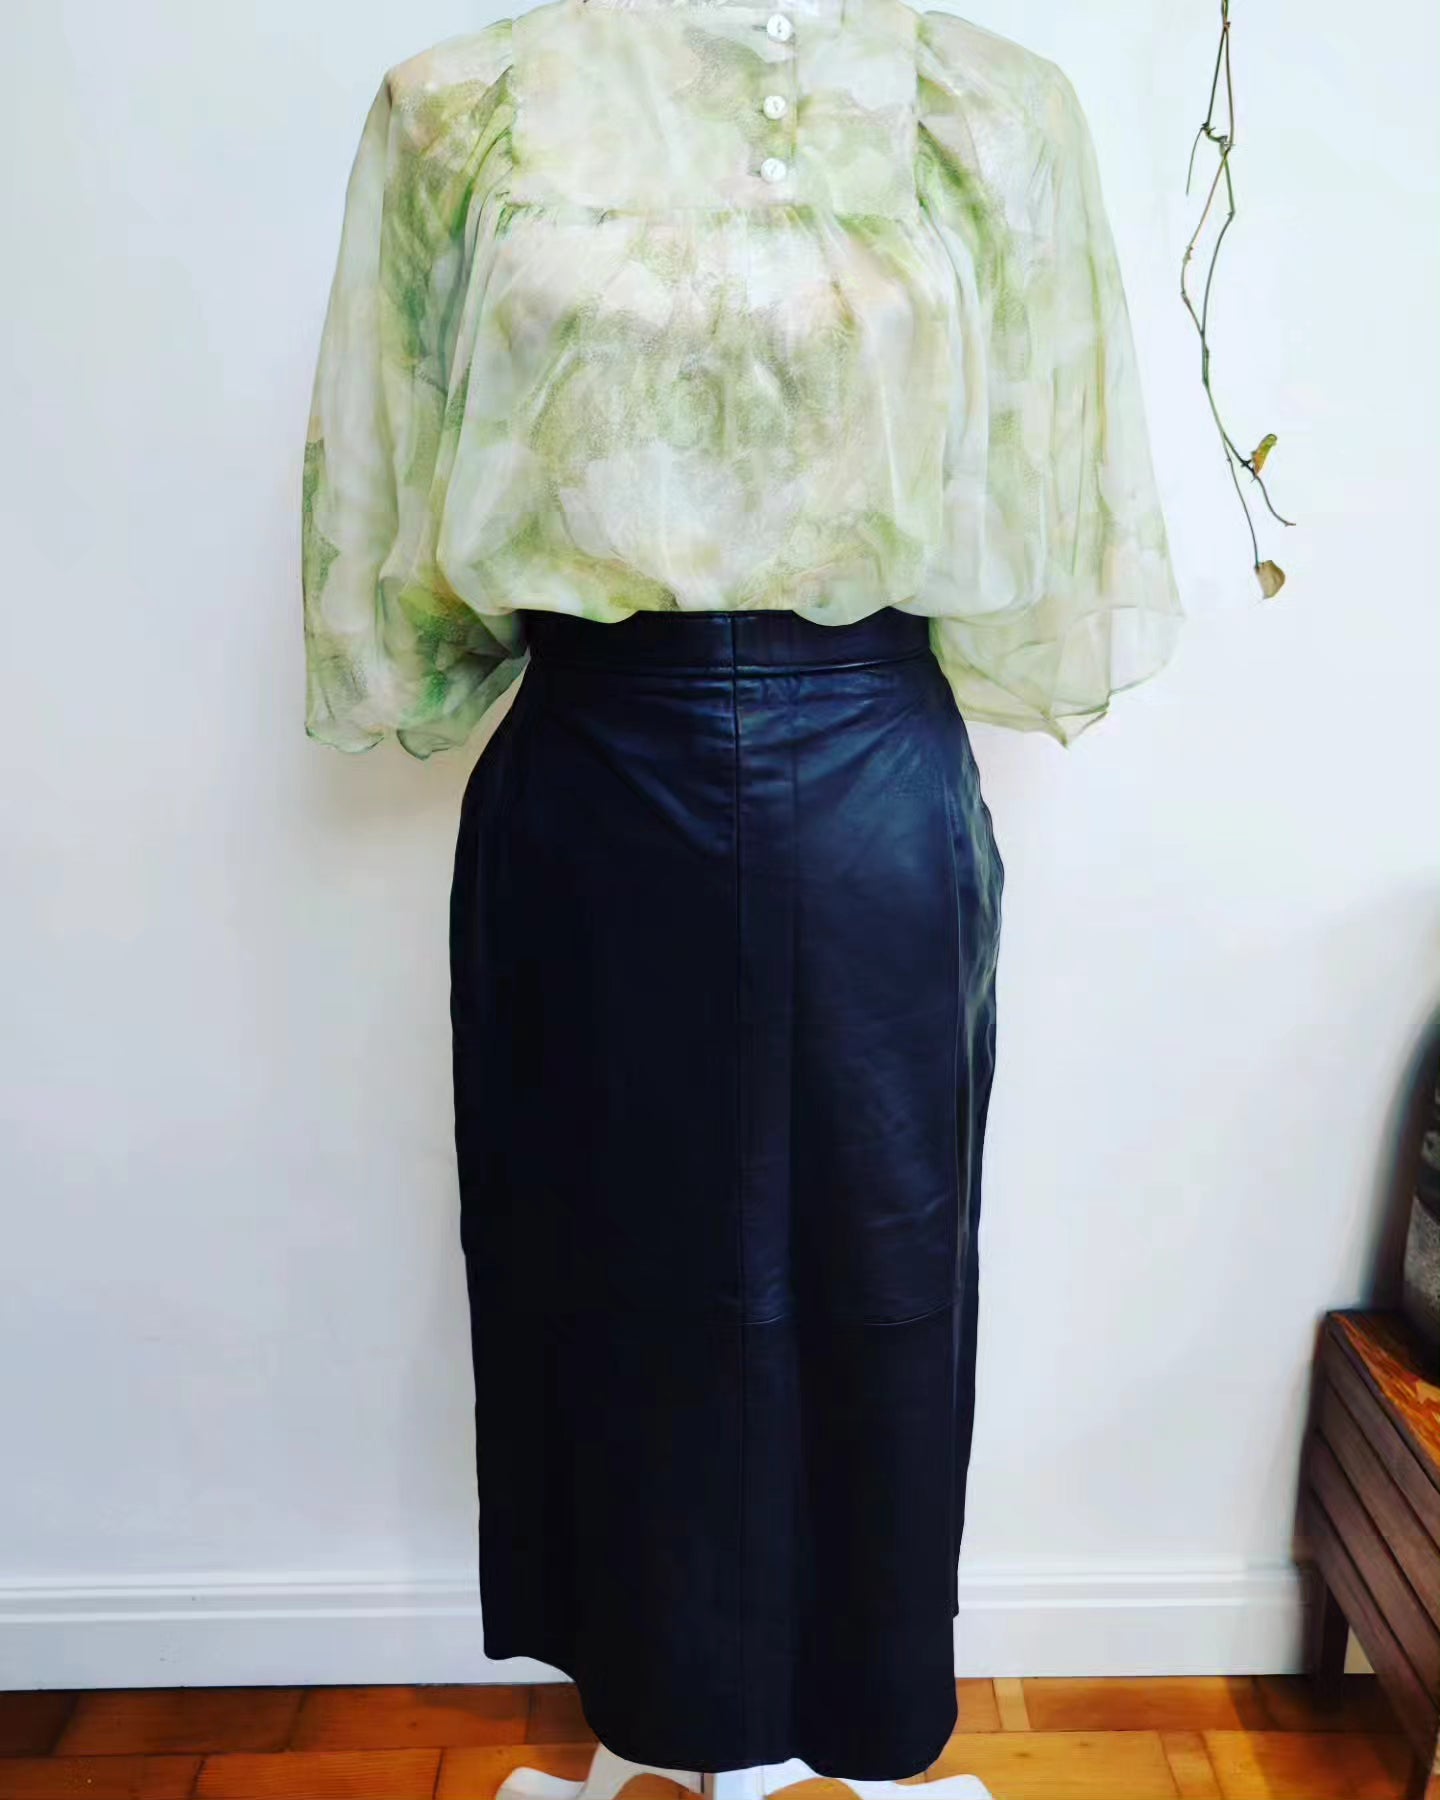 Stunning 70s butterfly wing top. Small- medium.